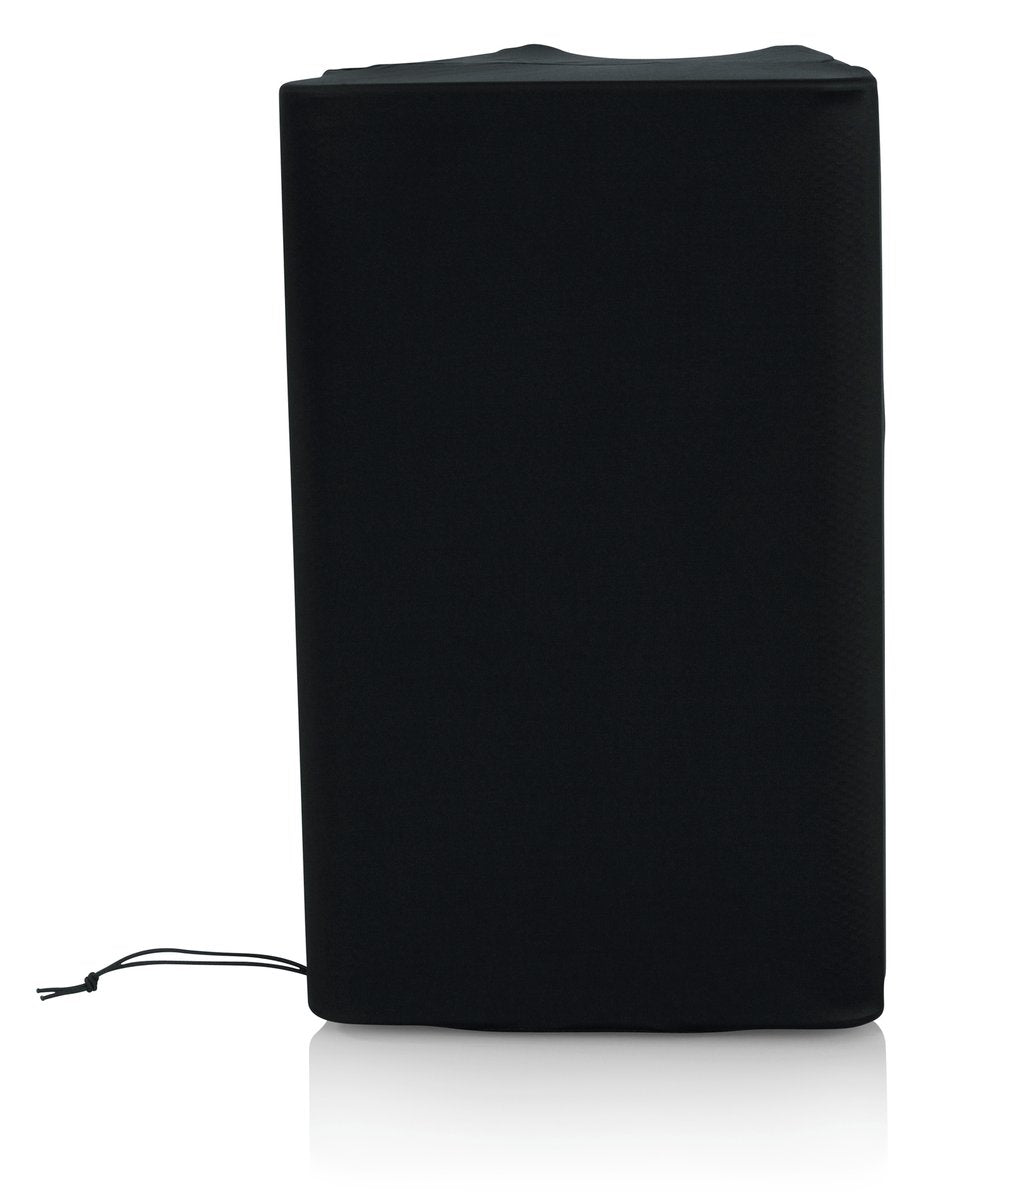 Stretchy dust cover to fit most 10"-12" portable speaker cabinets. Black